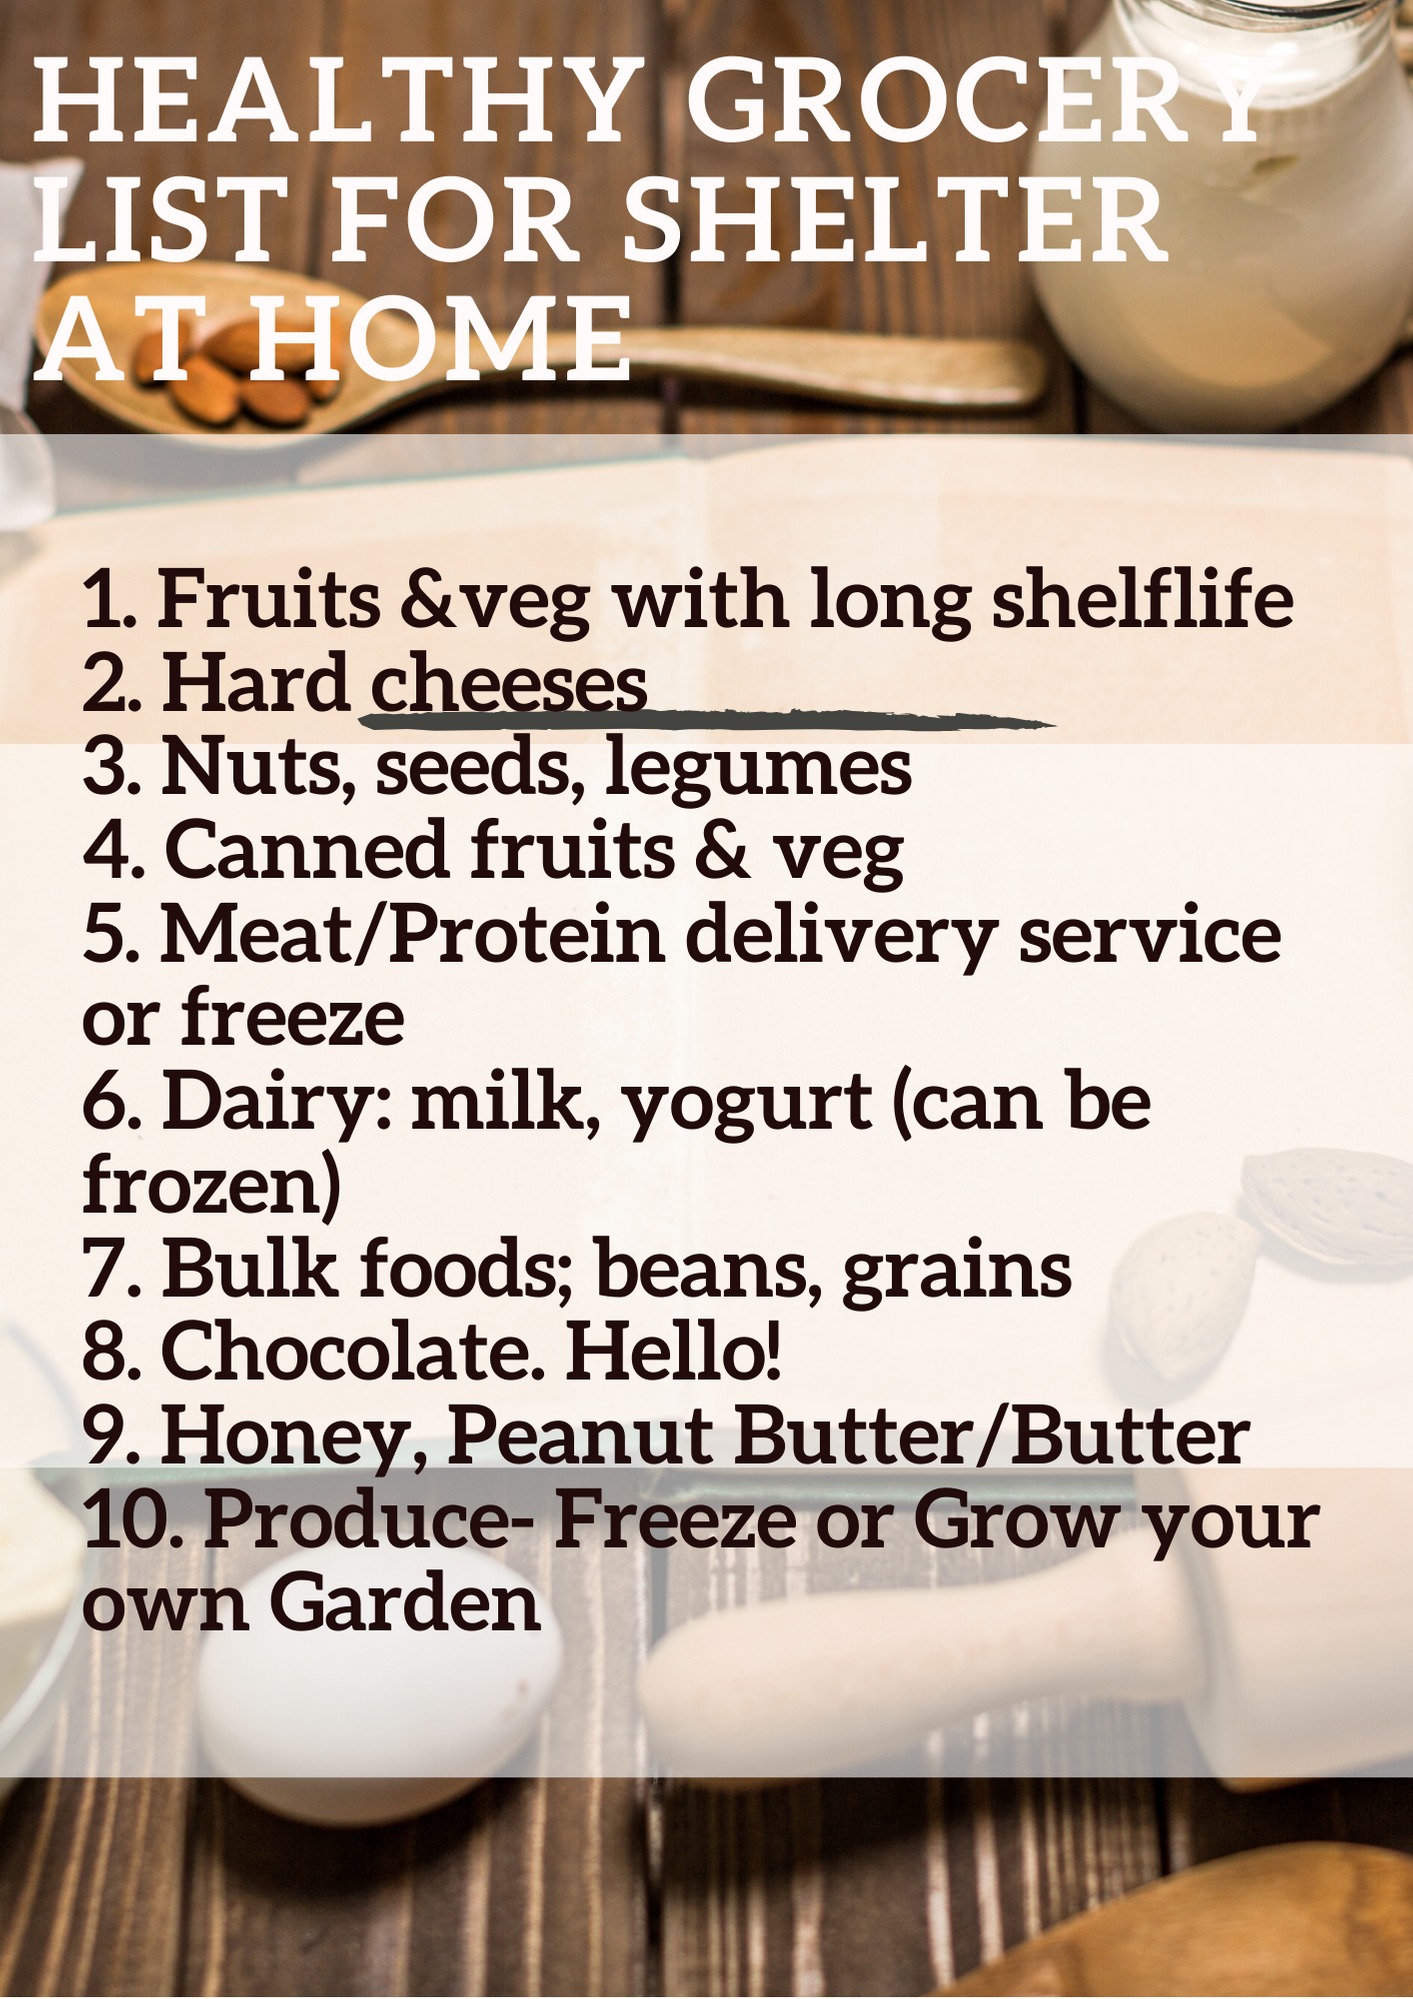 Healthy grocery list for shelter at home